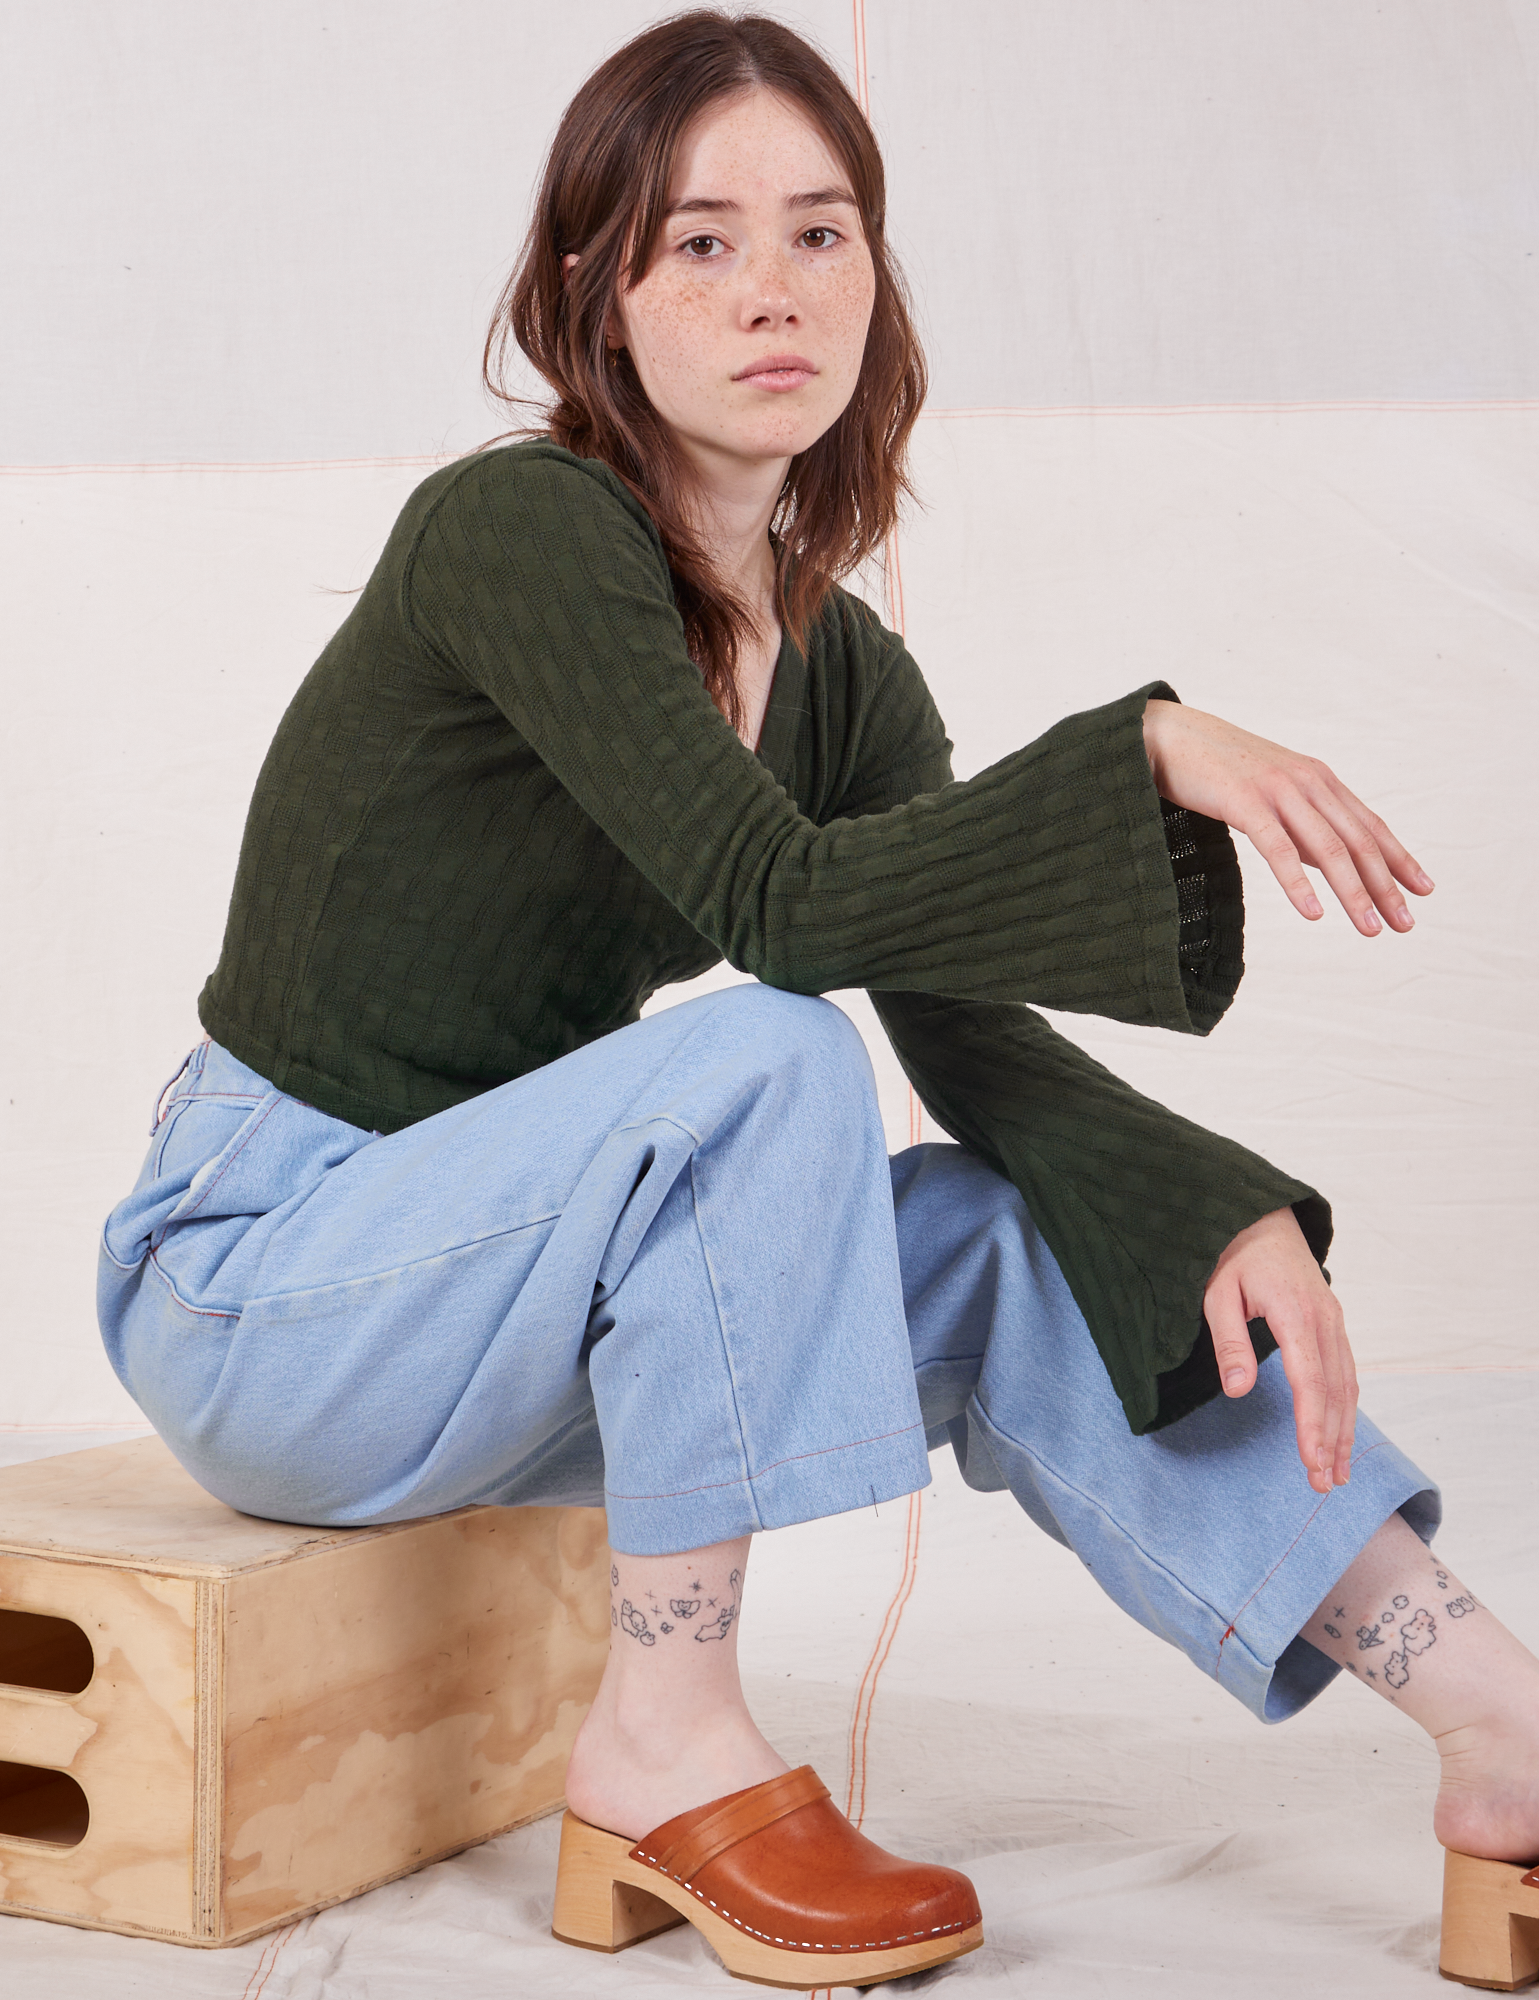 Hana is wearing Bell Sleeve Top in Swamp Green and light wash Petite Trouser Jeans